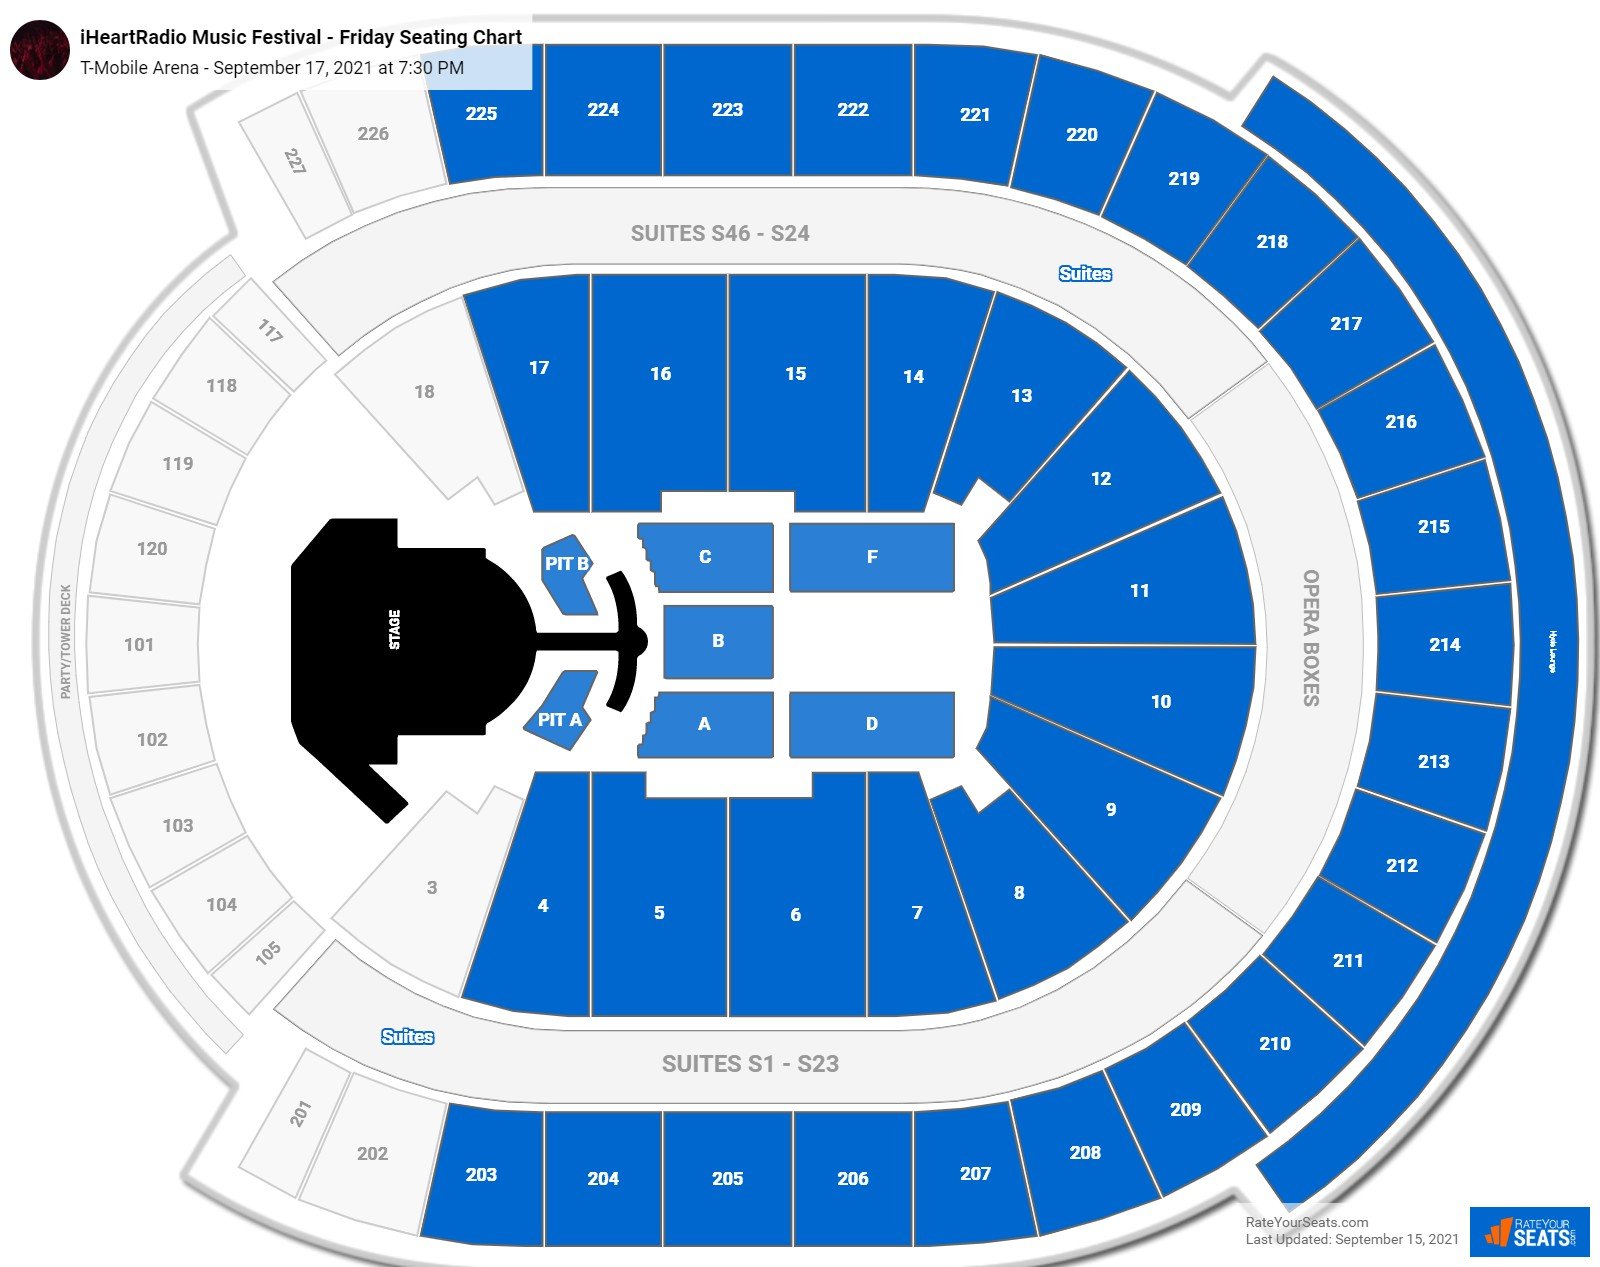 T Mobile Arena Seating Charts for Concerts RateYourSeats com